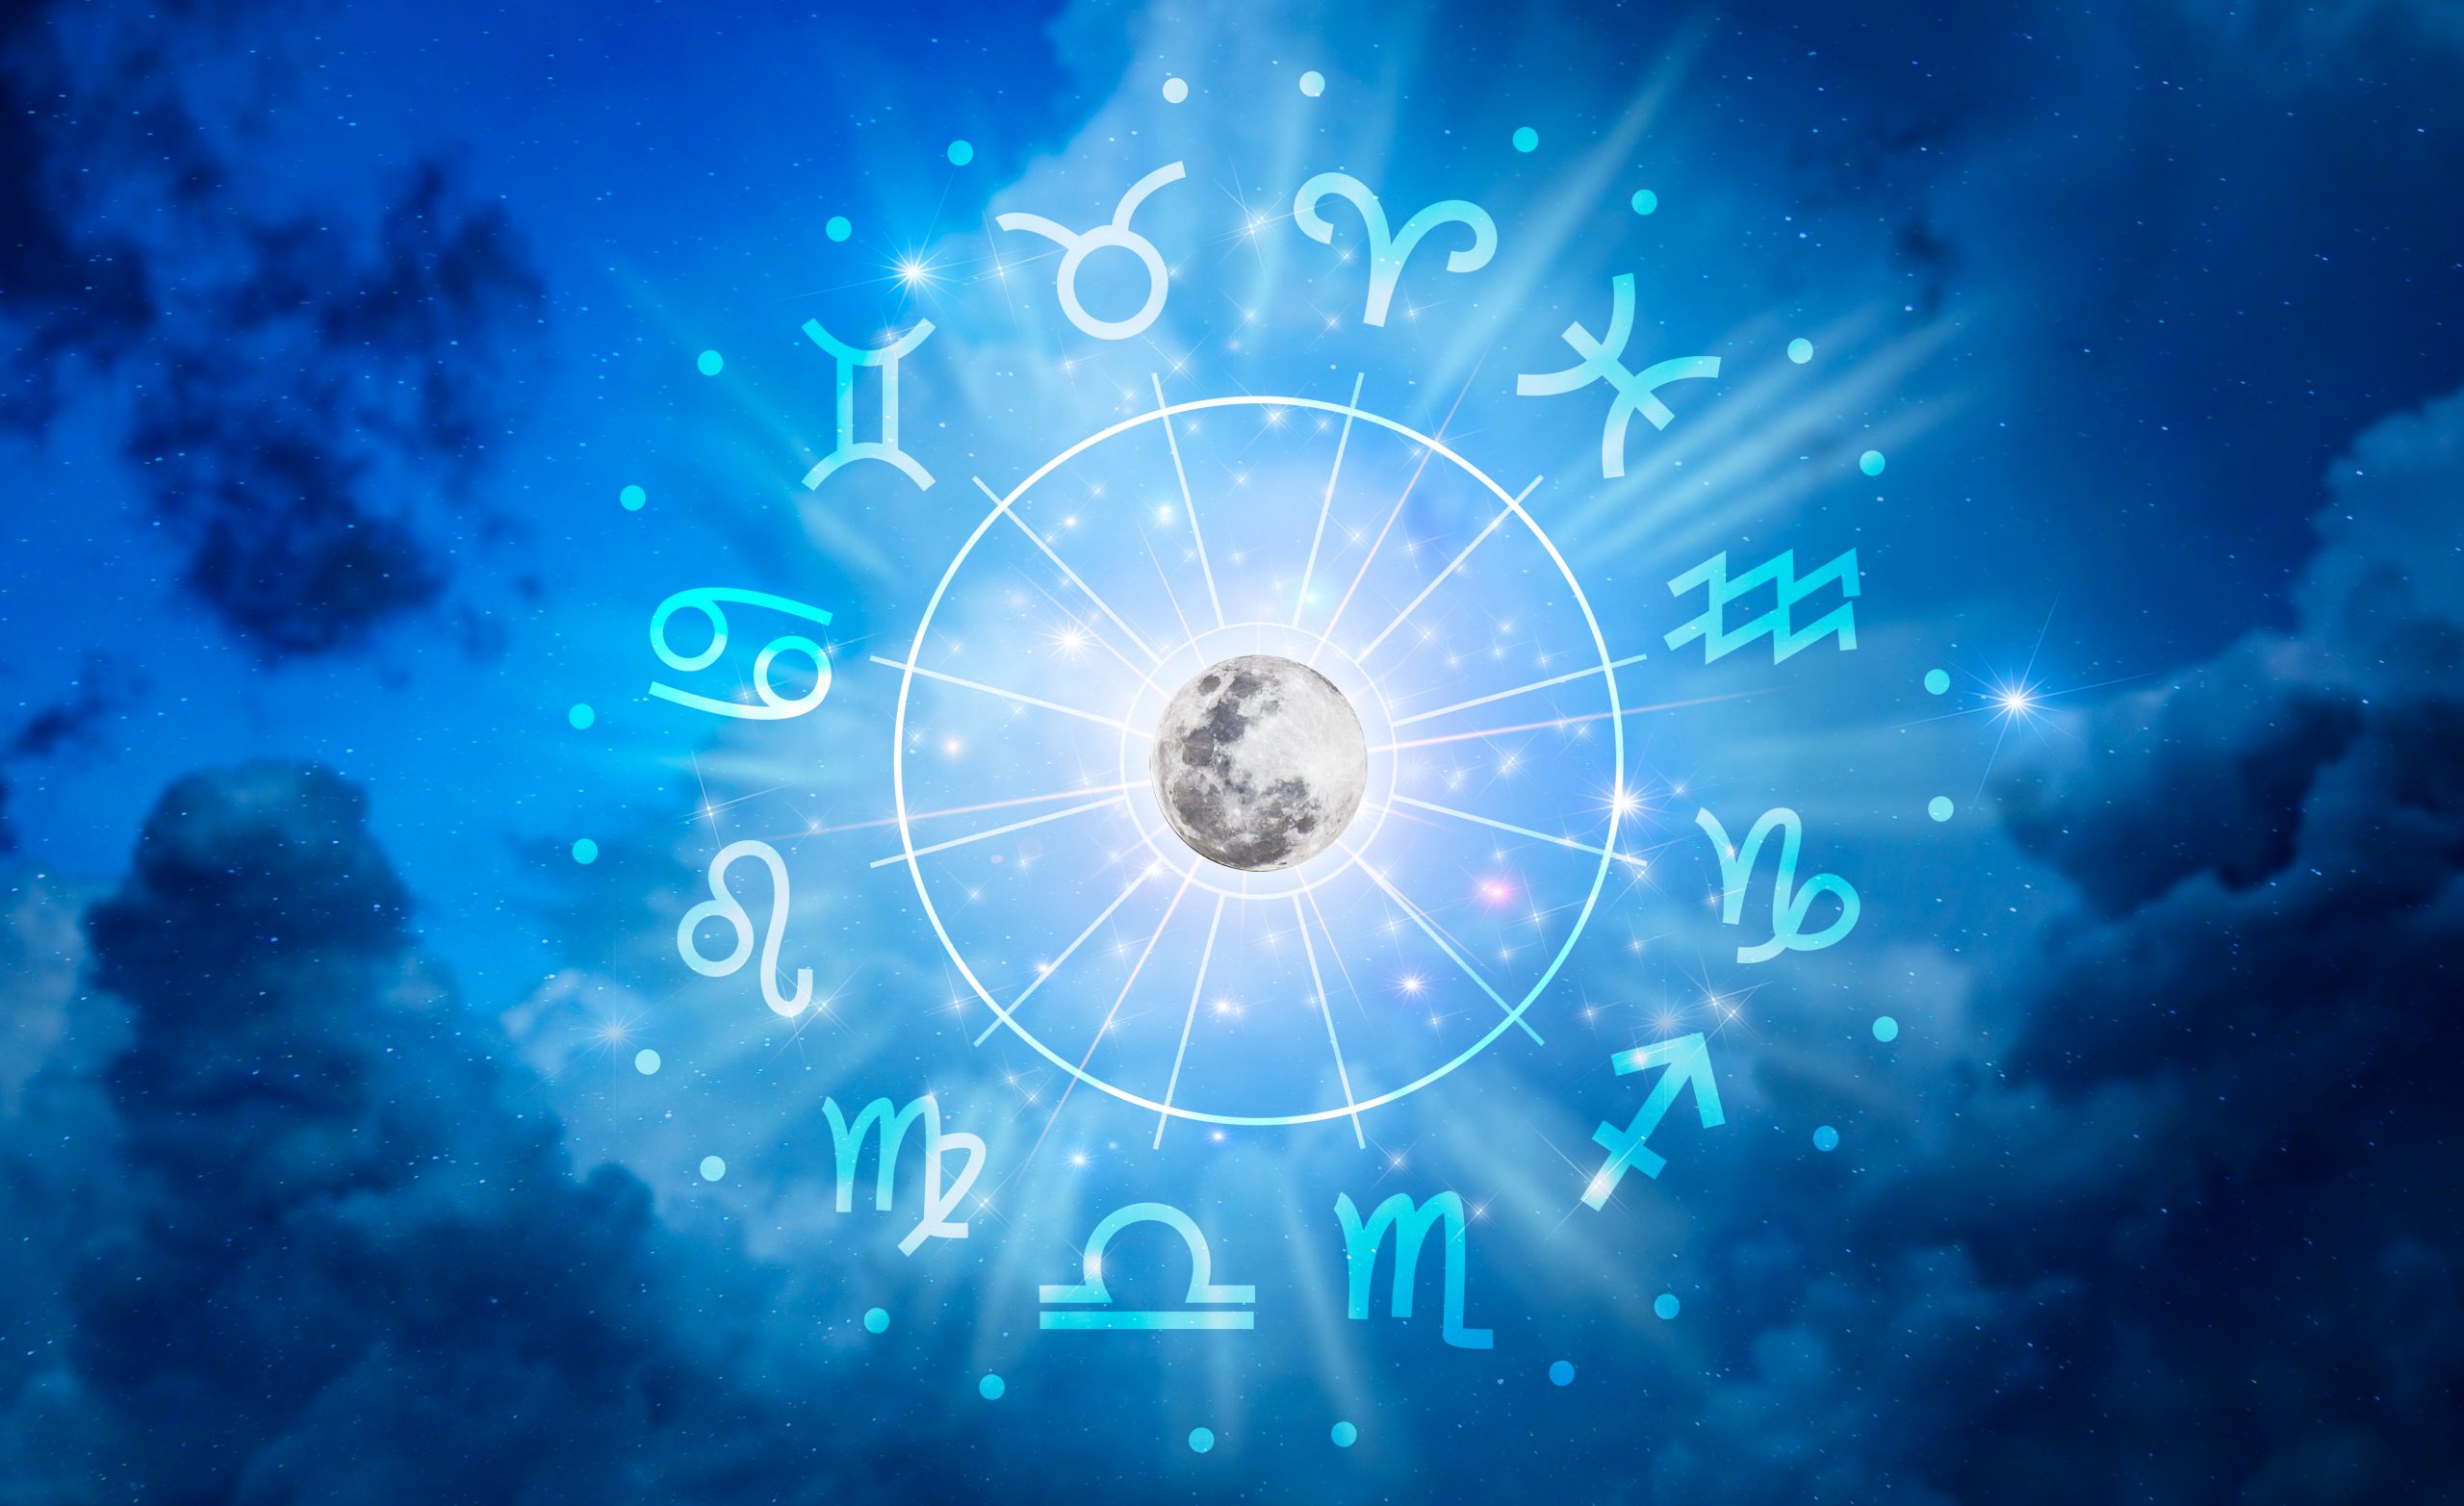 Zodiac Signs Inside Of Horoscope Circle. Astrology In The Sky With Many Stars And Moons Astrology And Horoscopes Concept